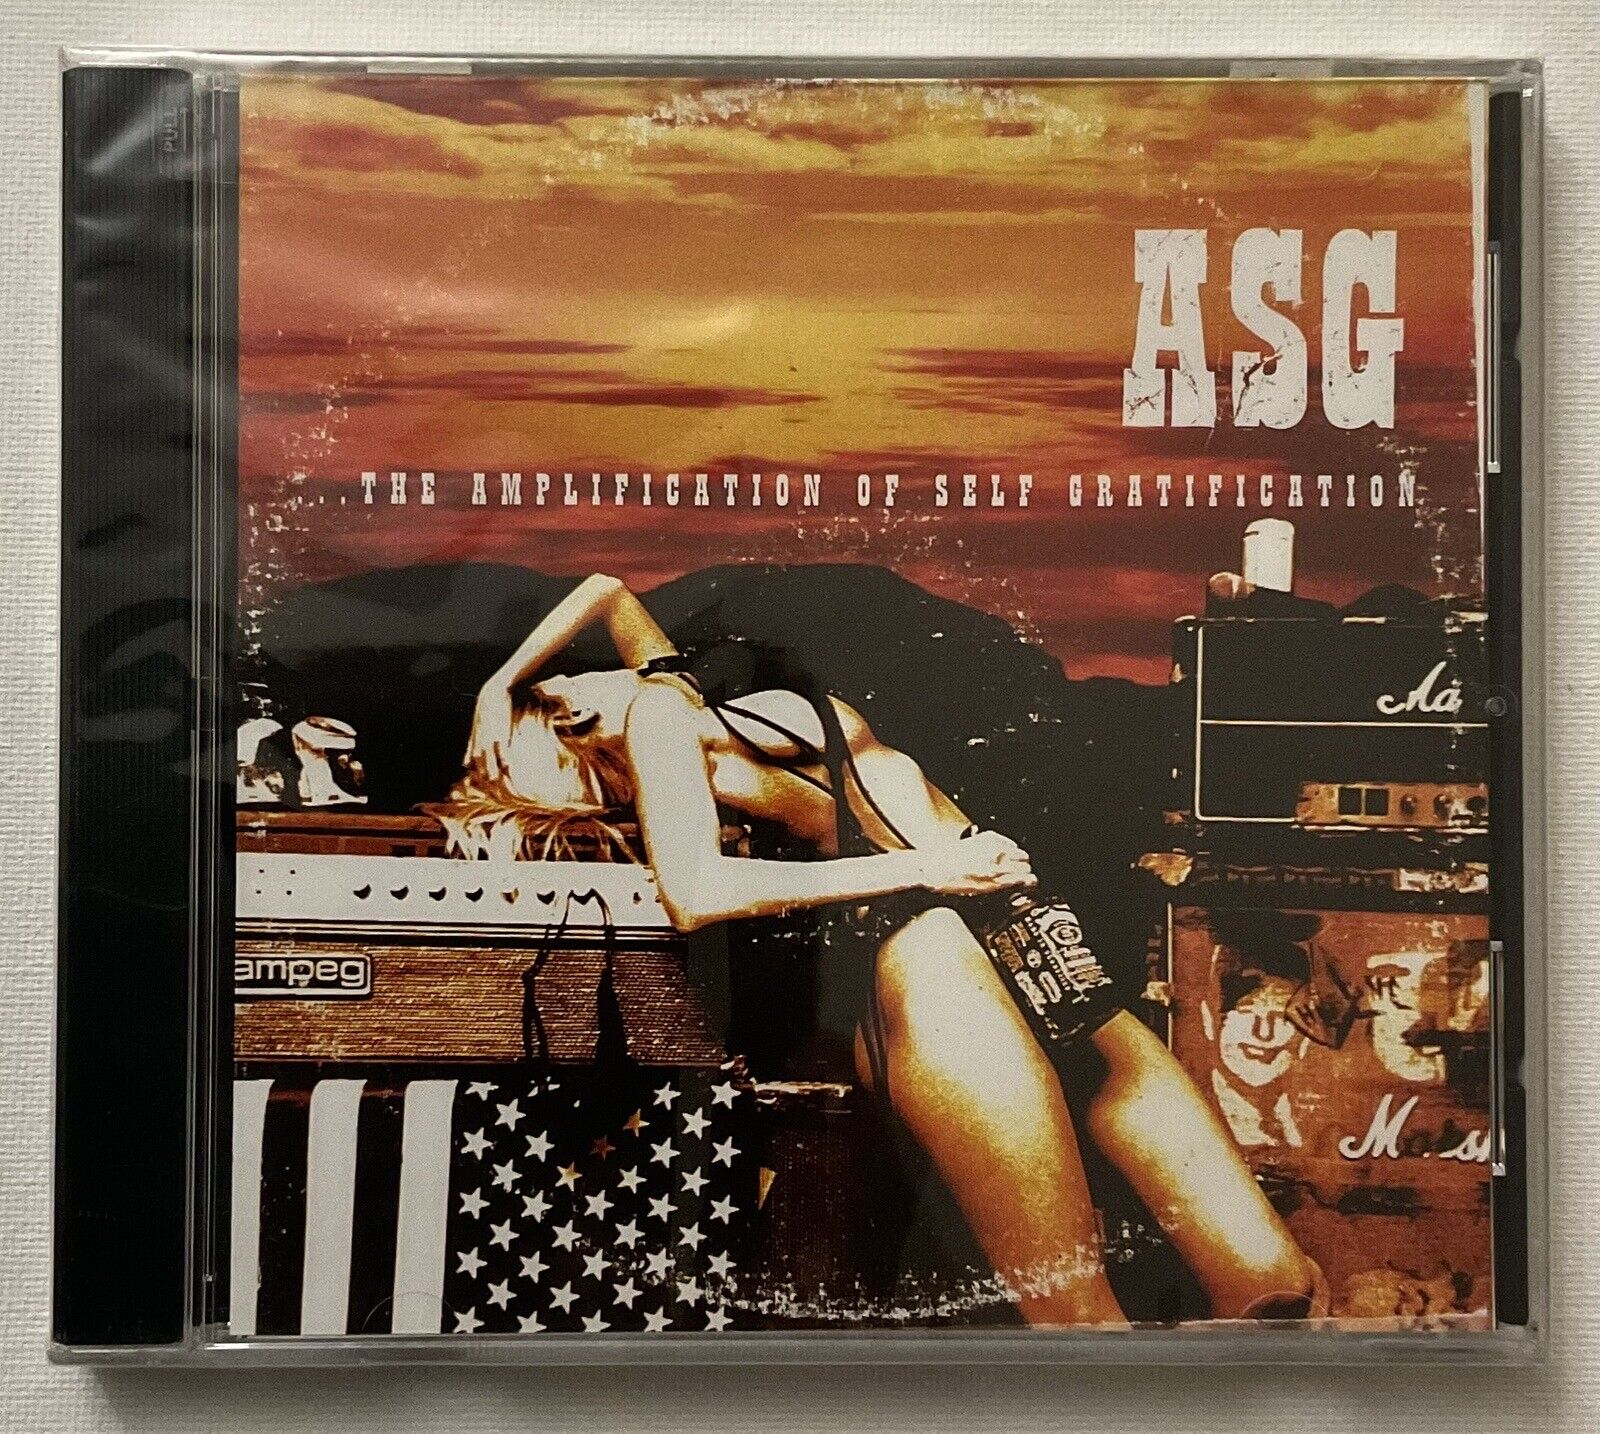 Amplification of Self Gratification by ASG (CD, Feb-2003) **New / Very Rare**